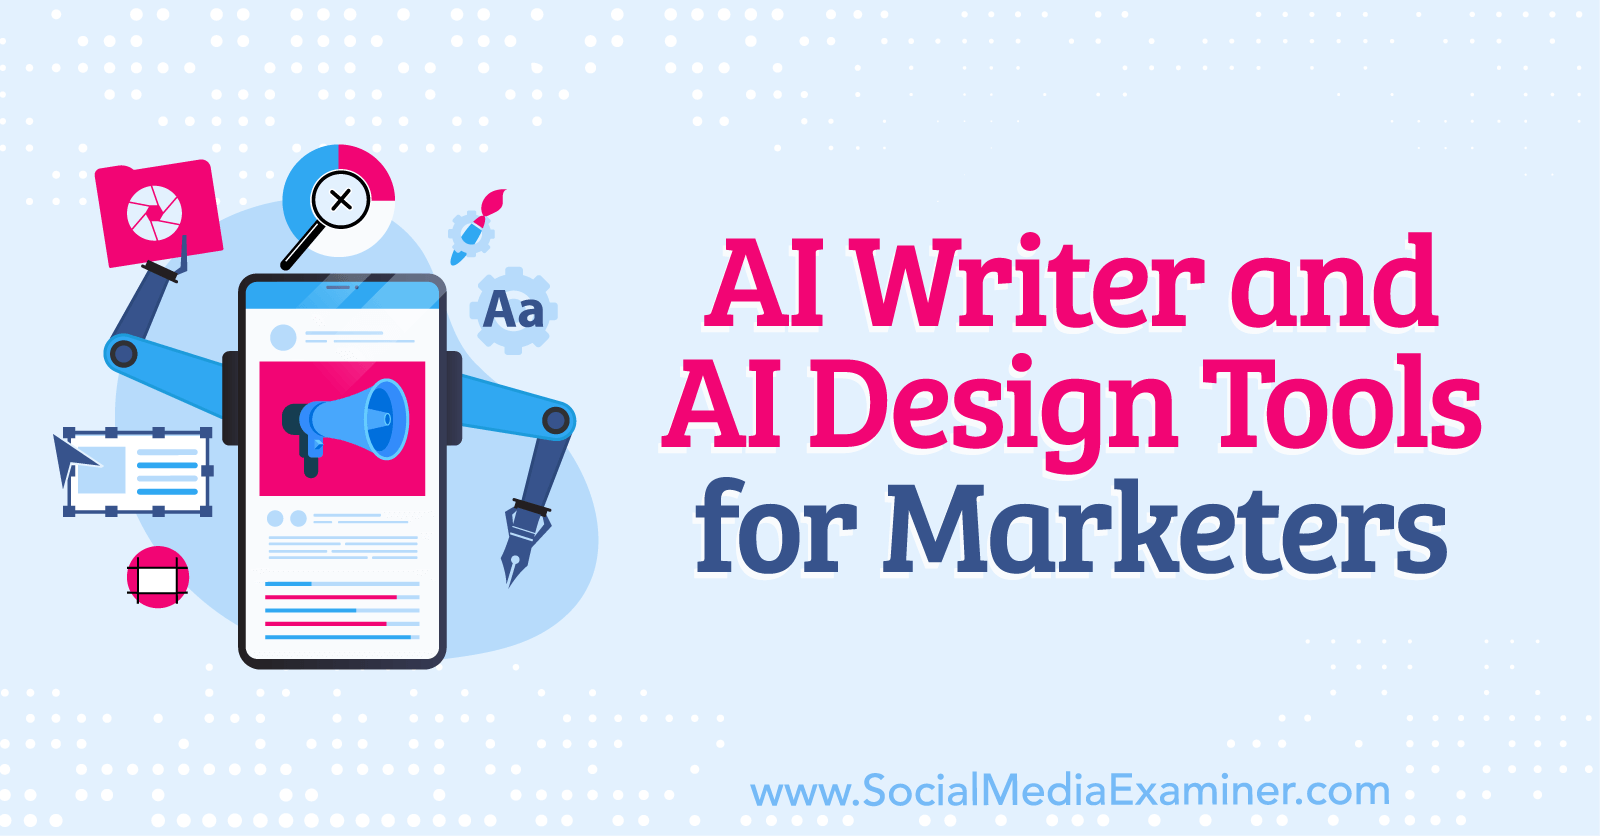 AI Writer and AI Design Tools for Marketers by Social Media Examiner